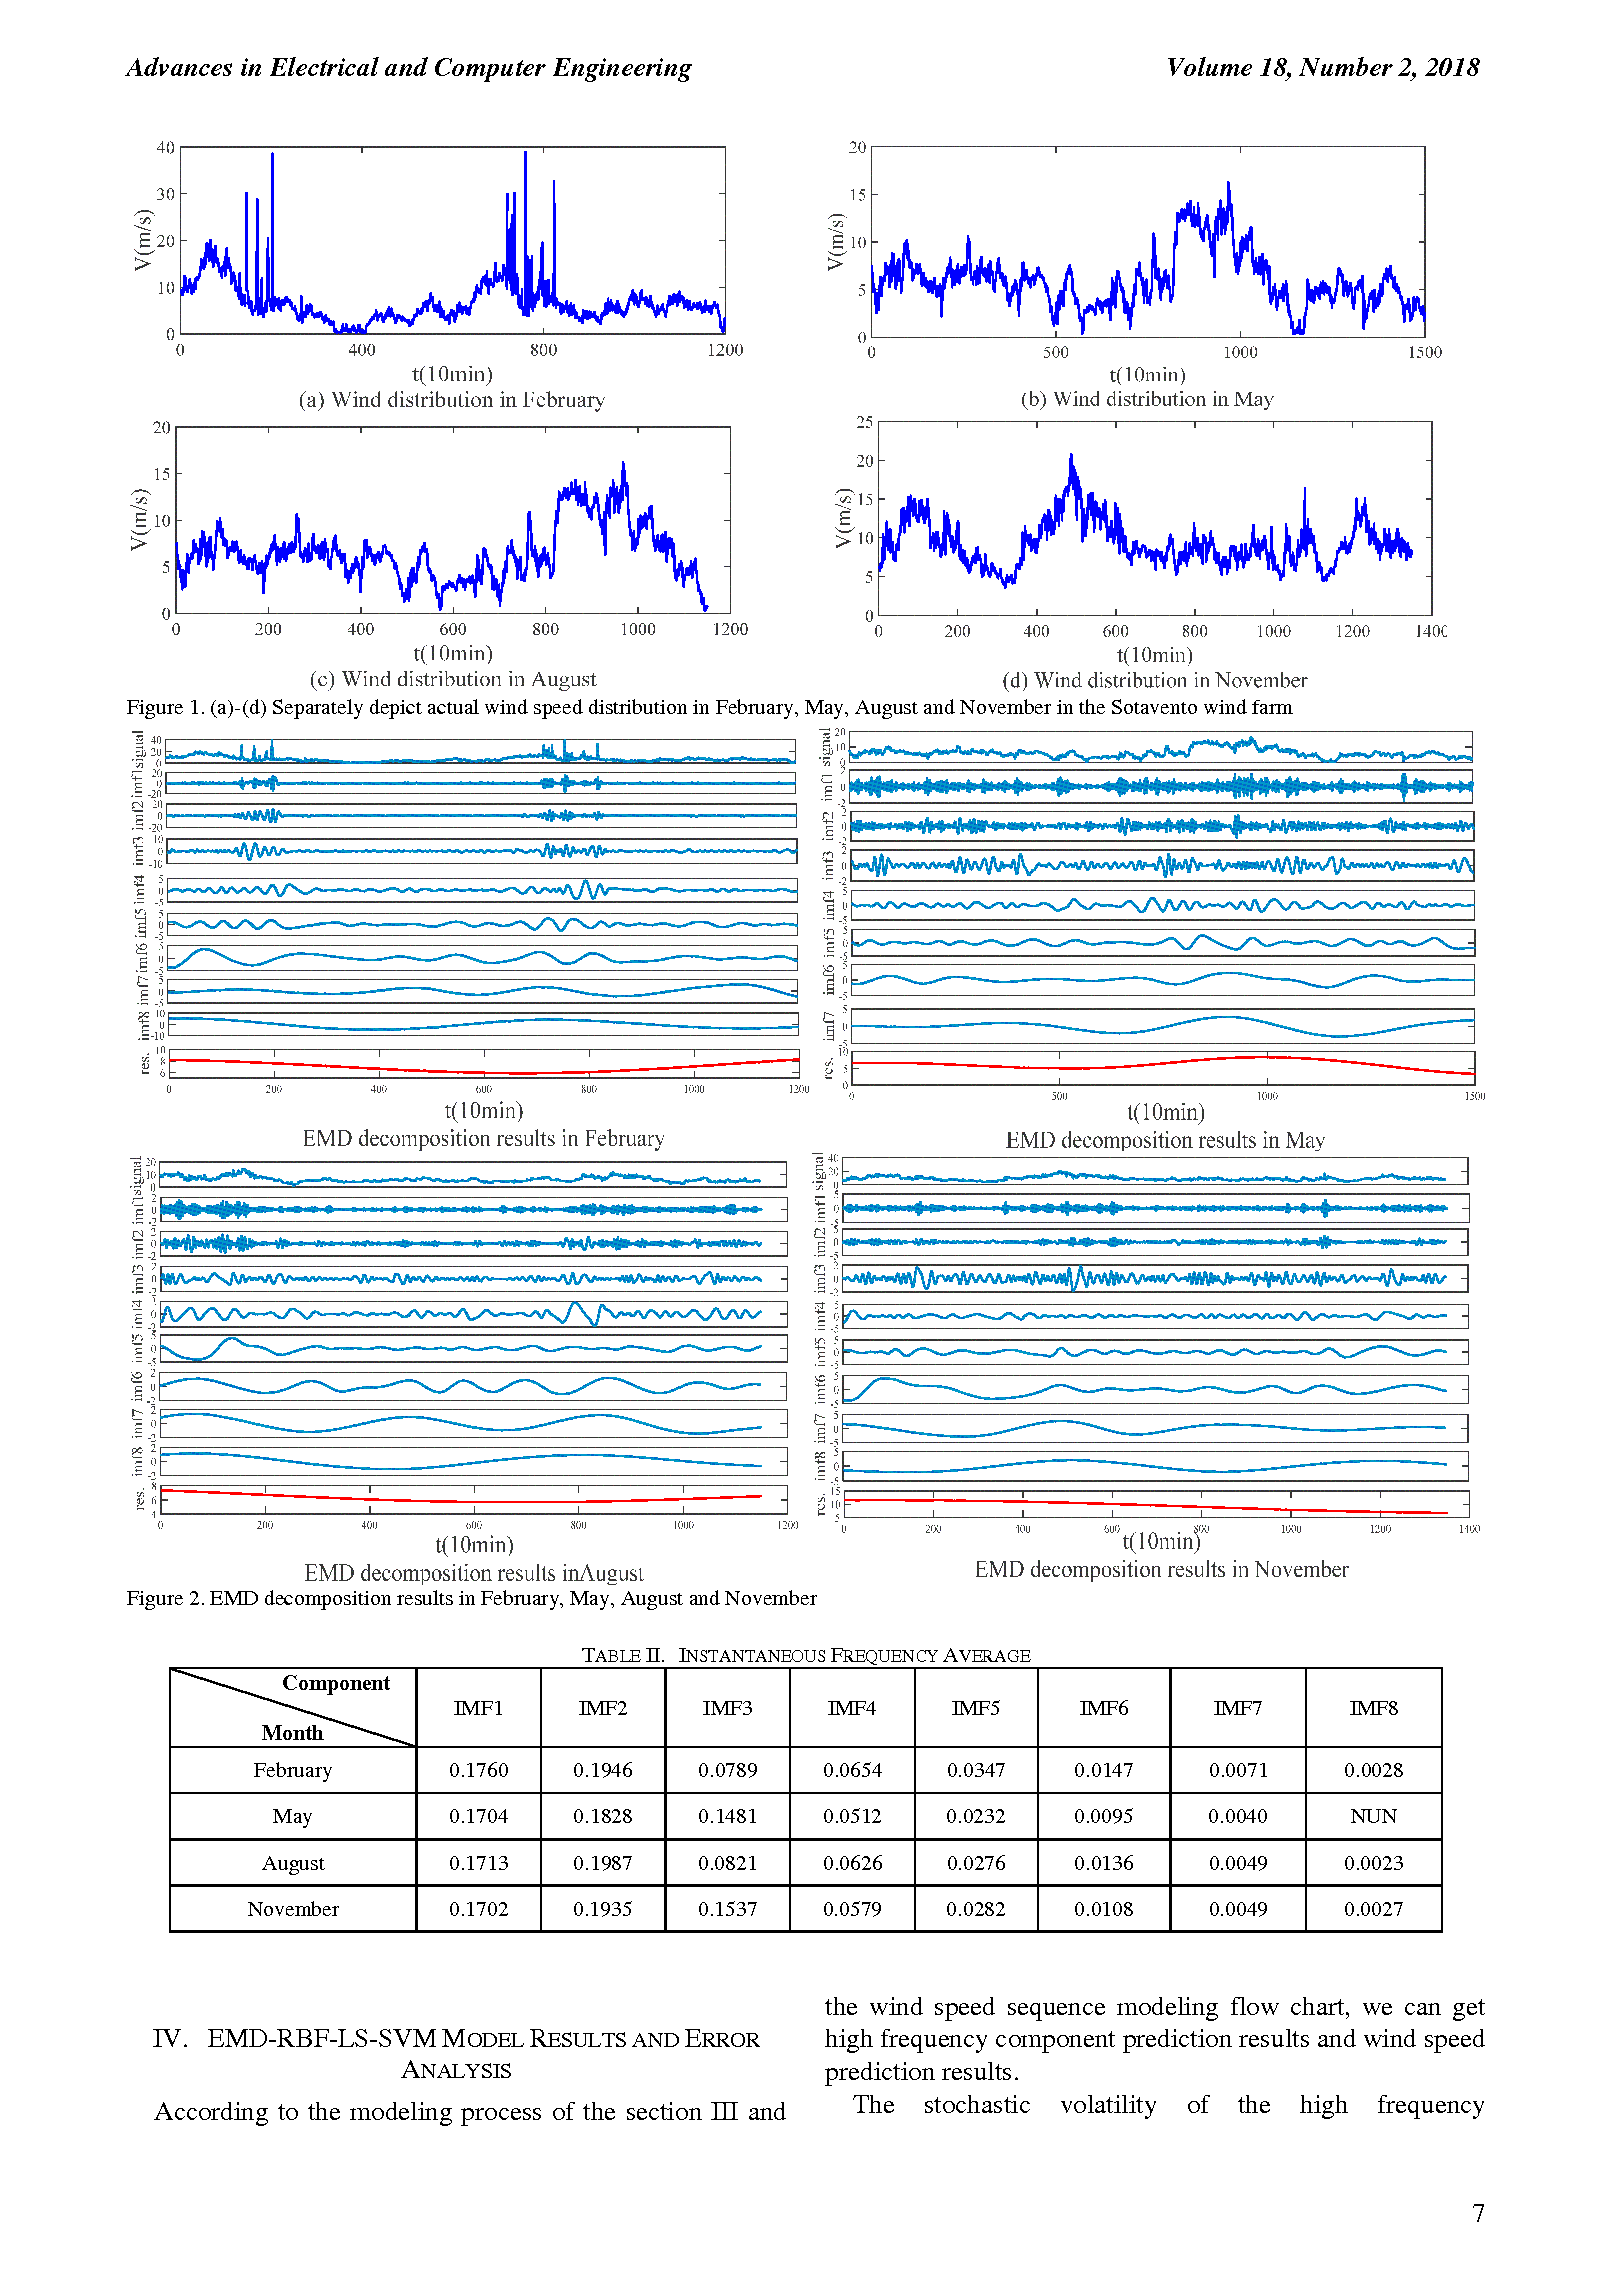 PDF Quickview for paper with DOI:10.4316/AECE.2018.02001